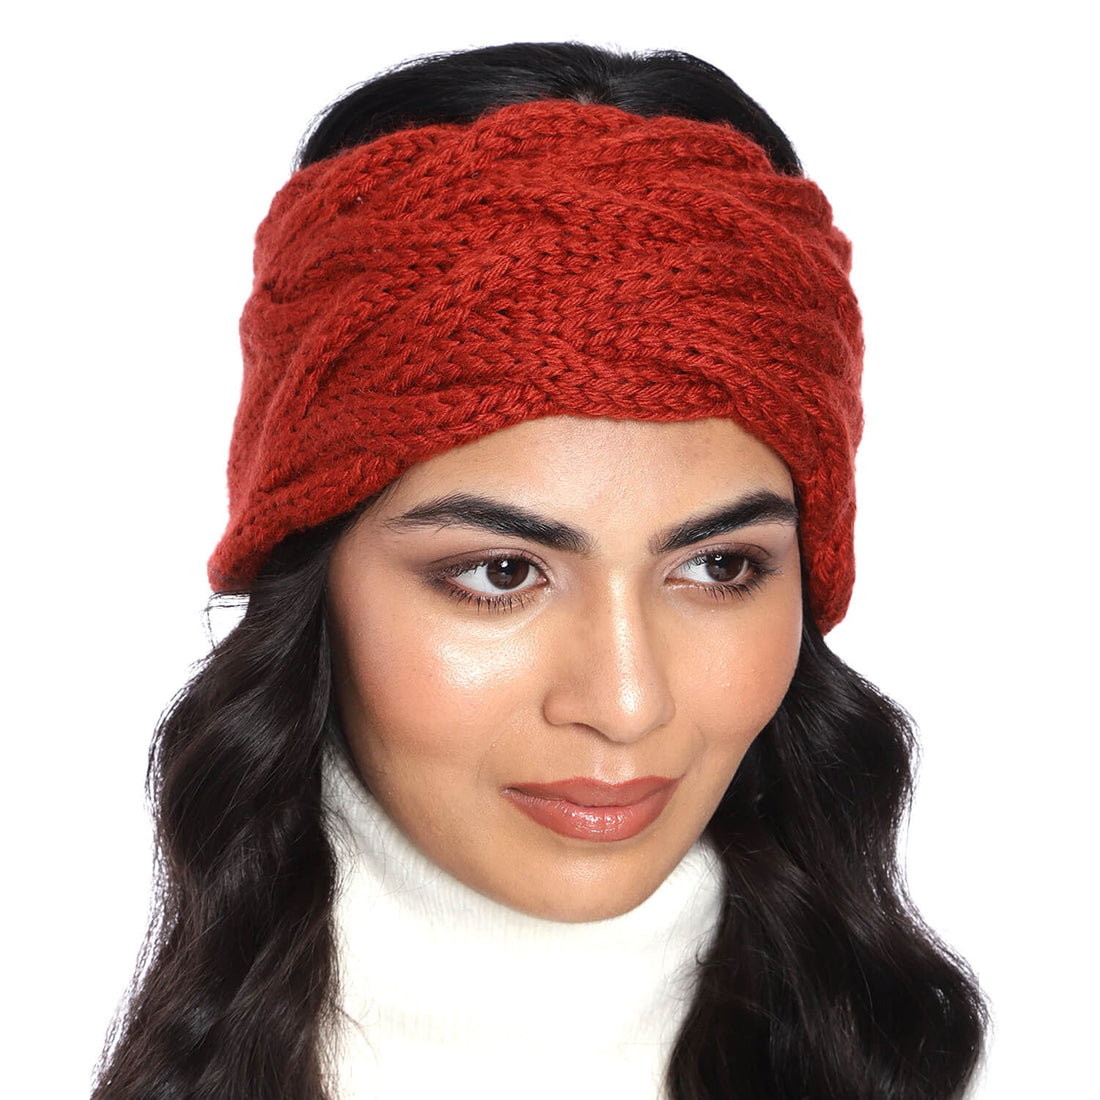 Double Cable Headband - Brick Red 108